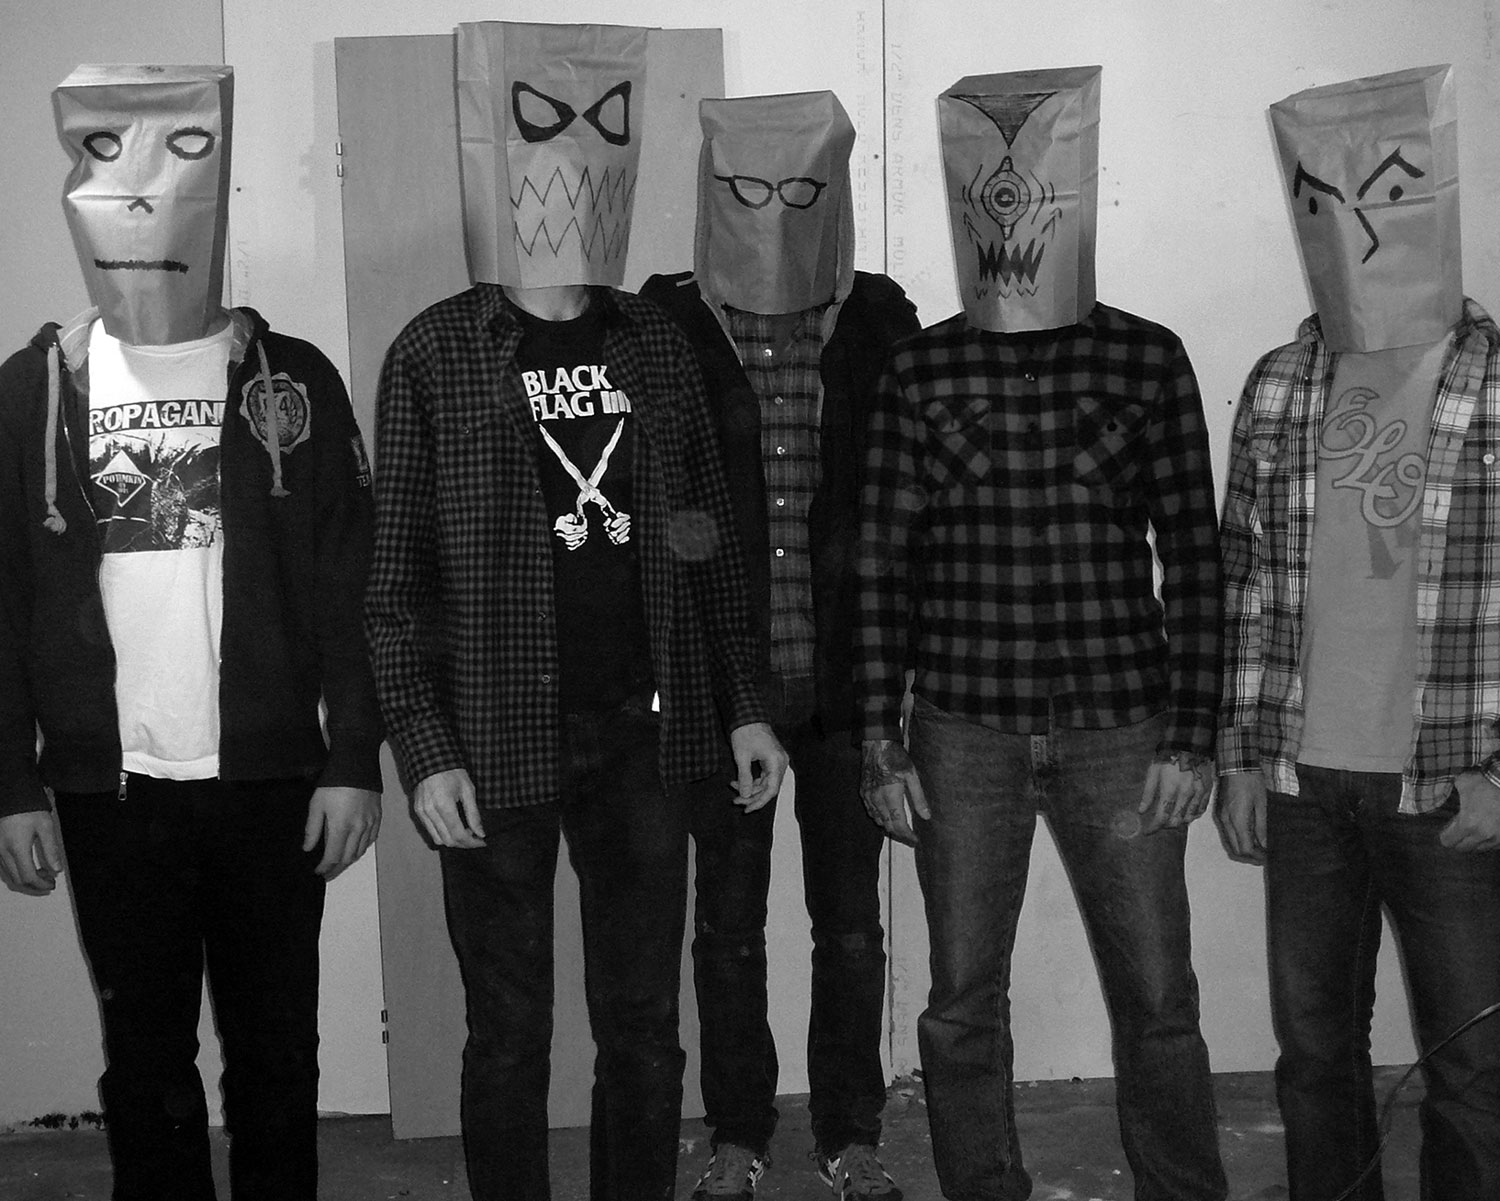 The members of the band standing in an empty room with paper bags on their heads with odd faces drawn on them.